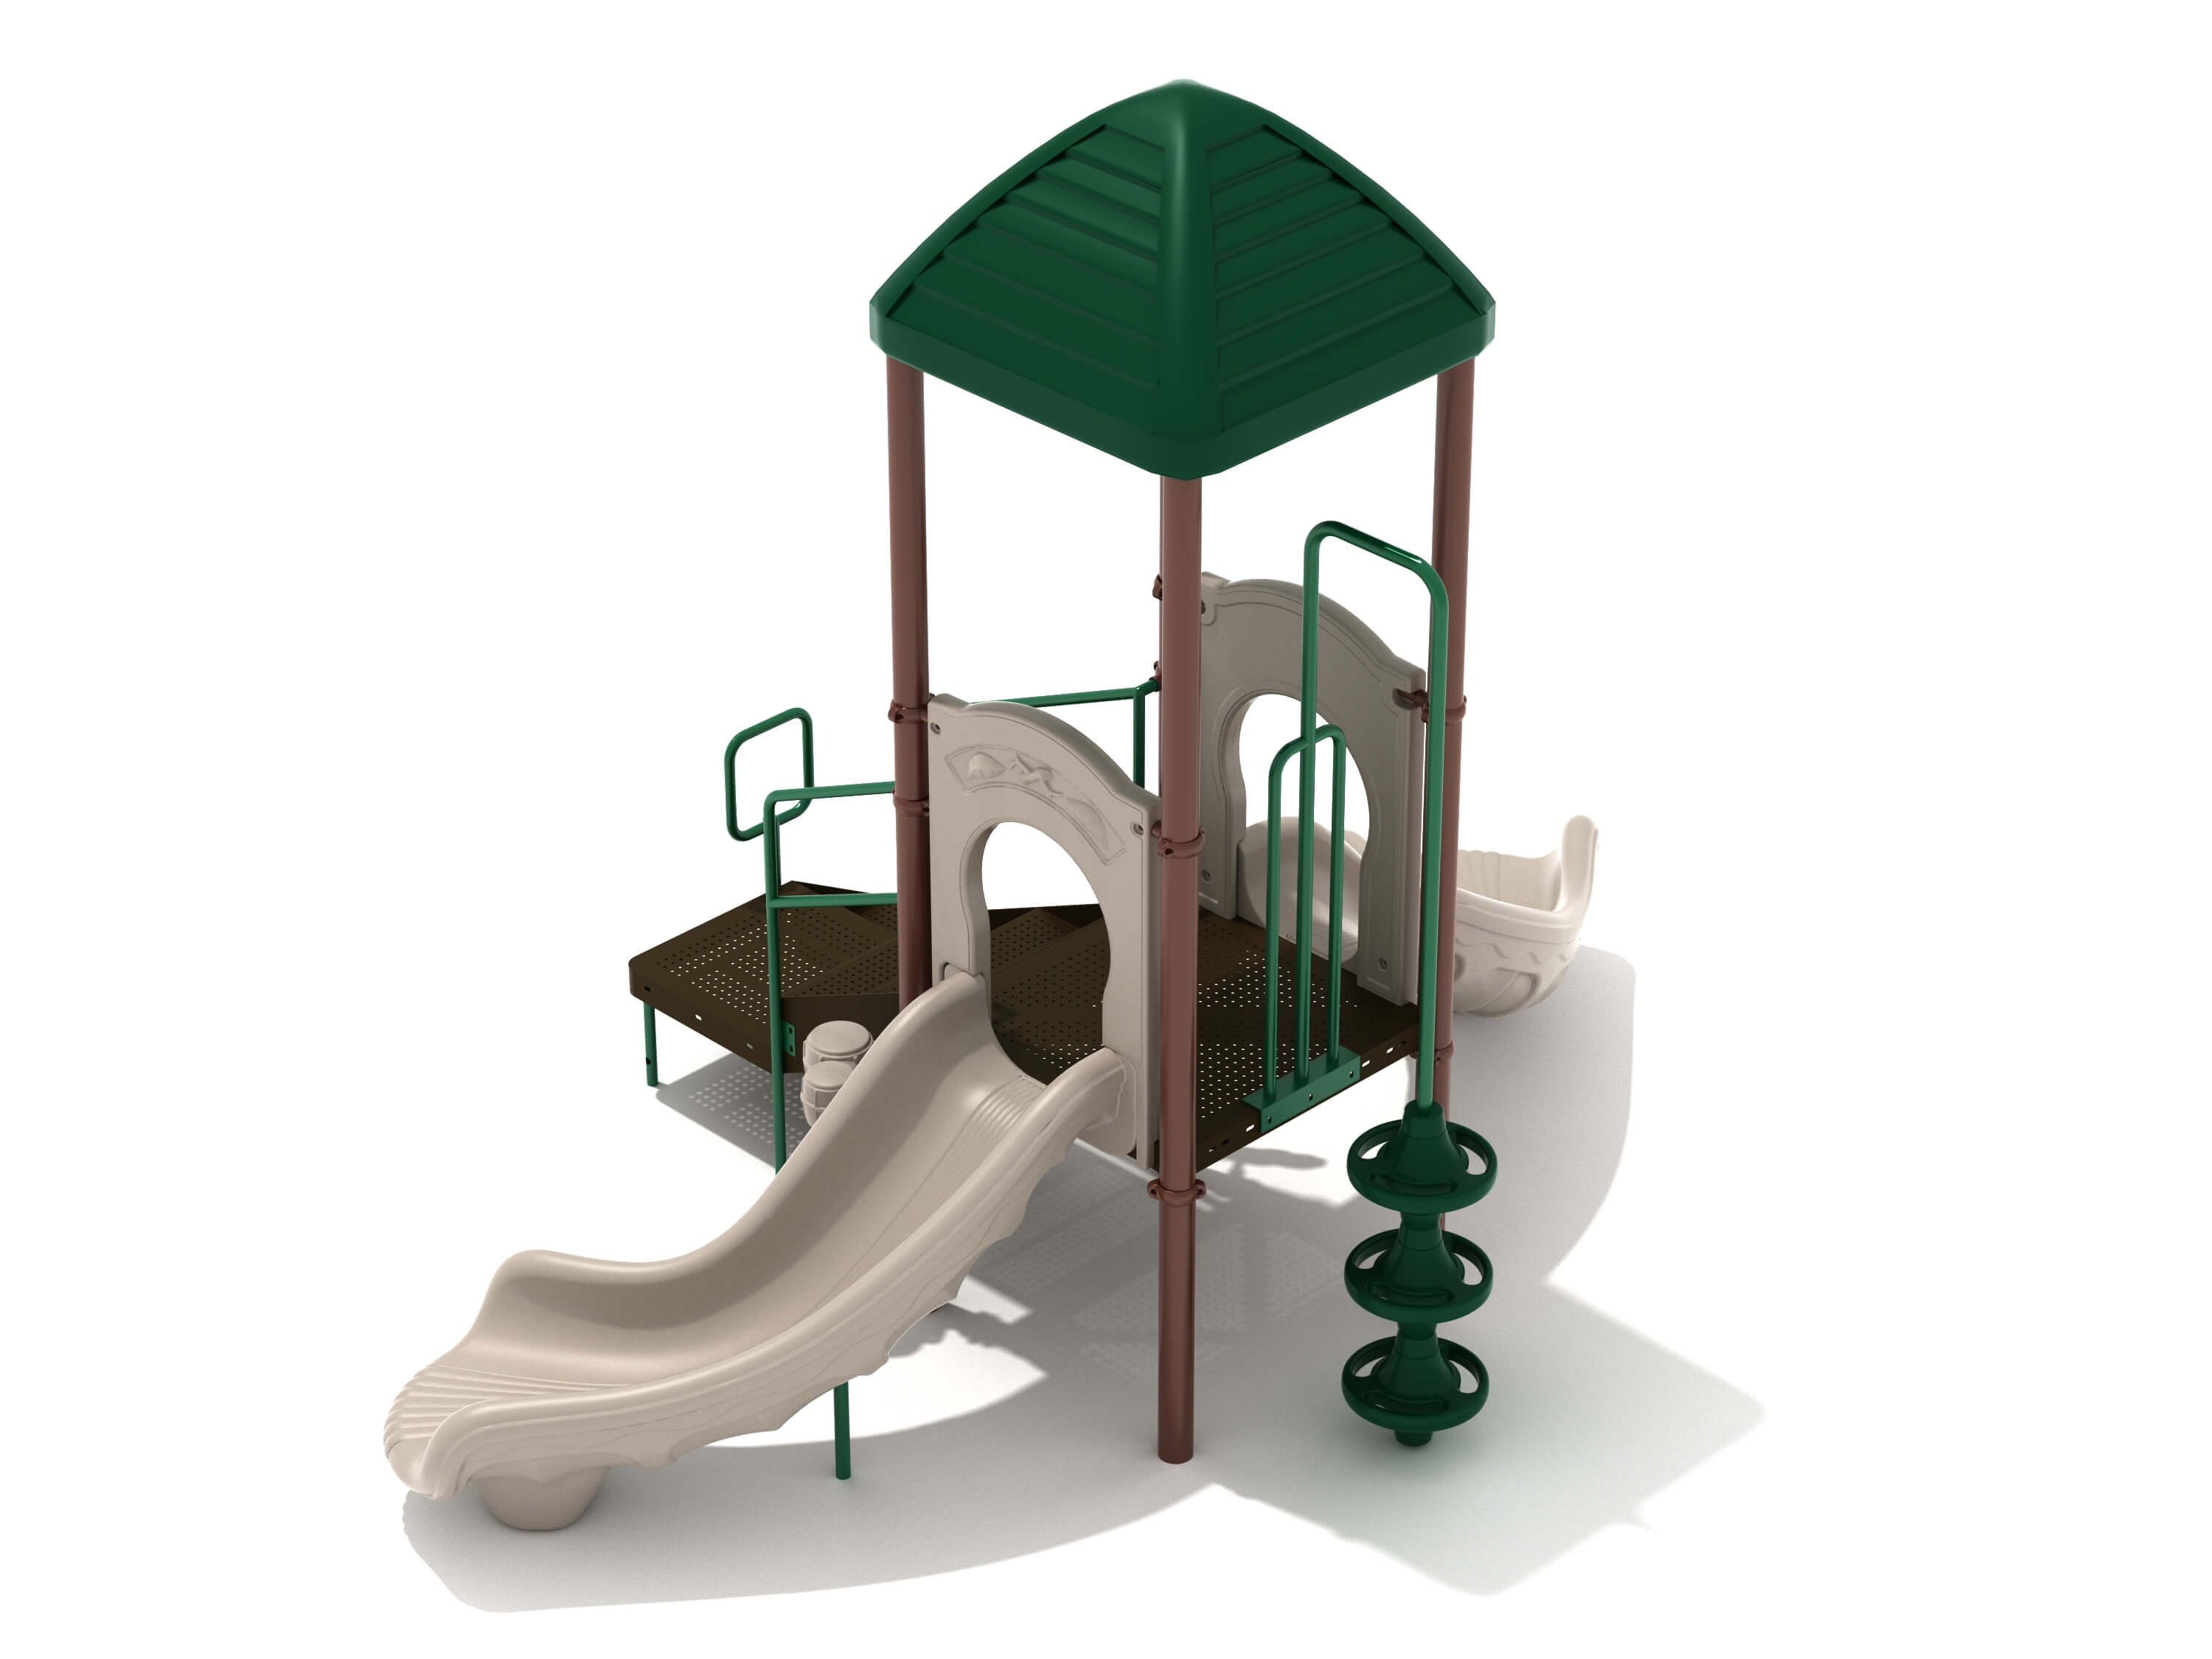 Commercial Playground Equipment – Madison (PGE-PKP002) - Rainbow Play Systems of Texas